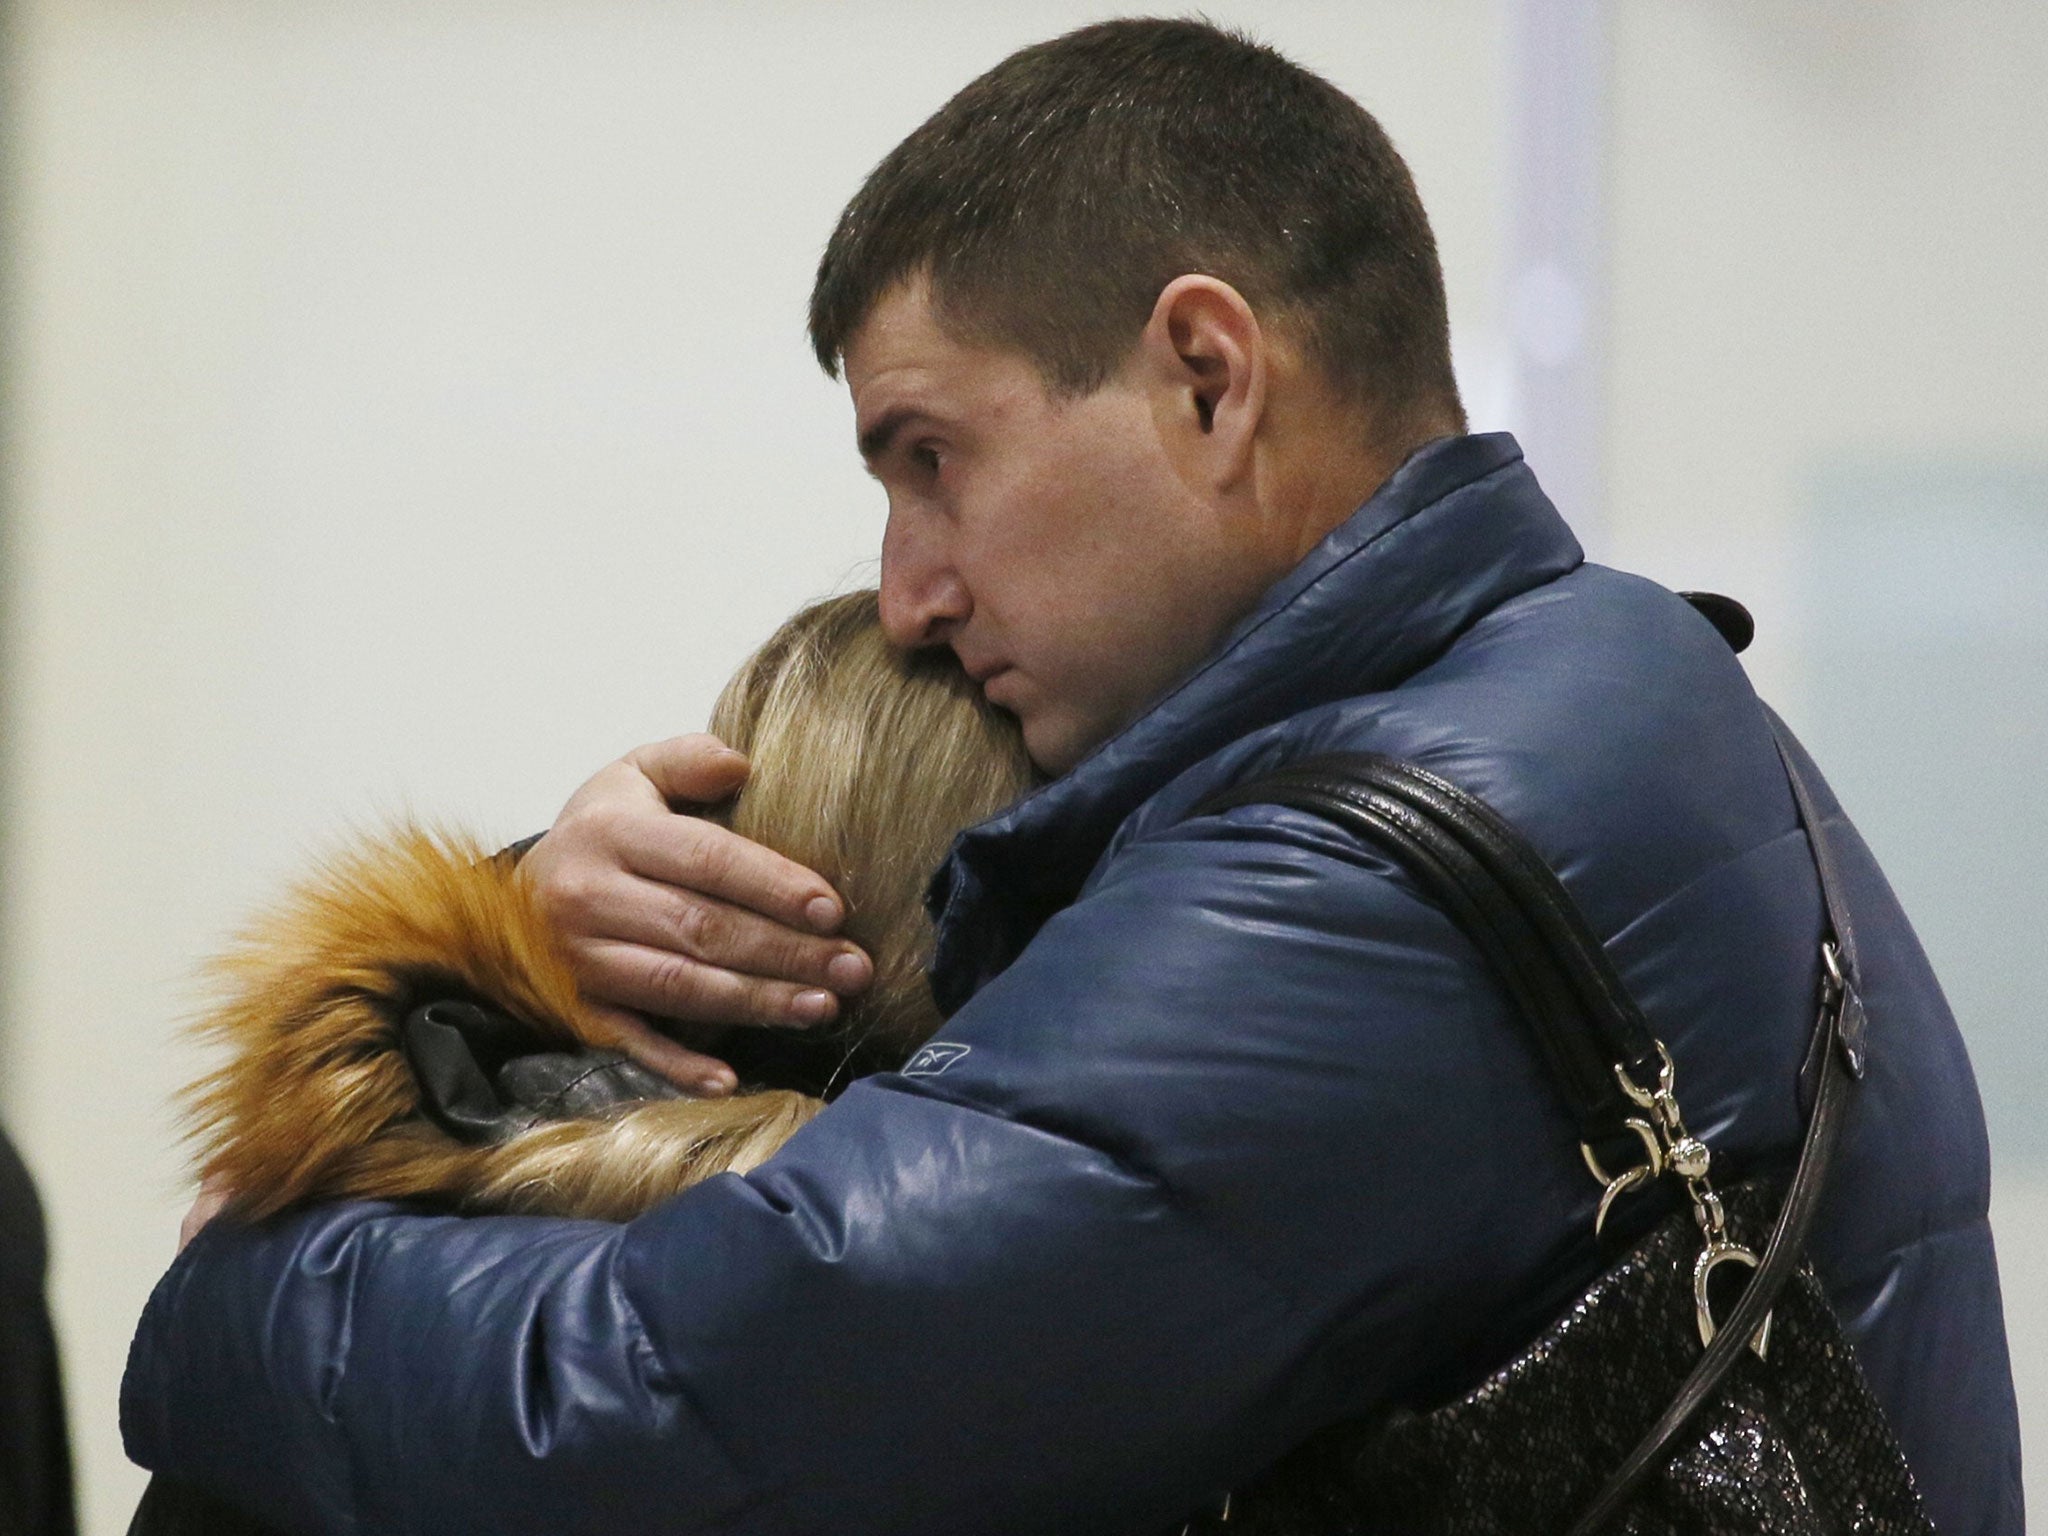 Most of the victims were believed to be holidaymakers travelling home to Russia